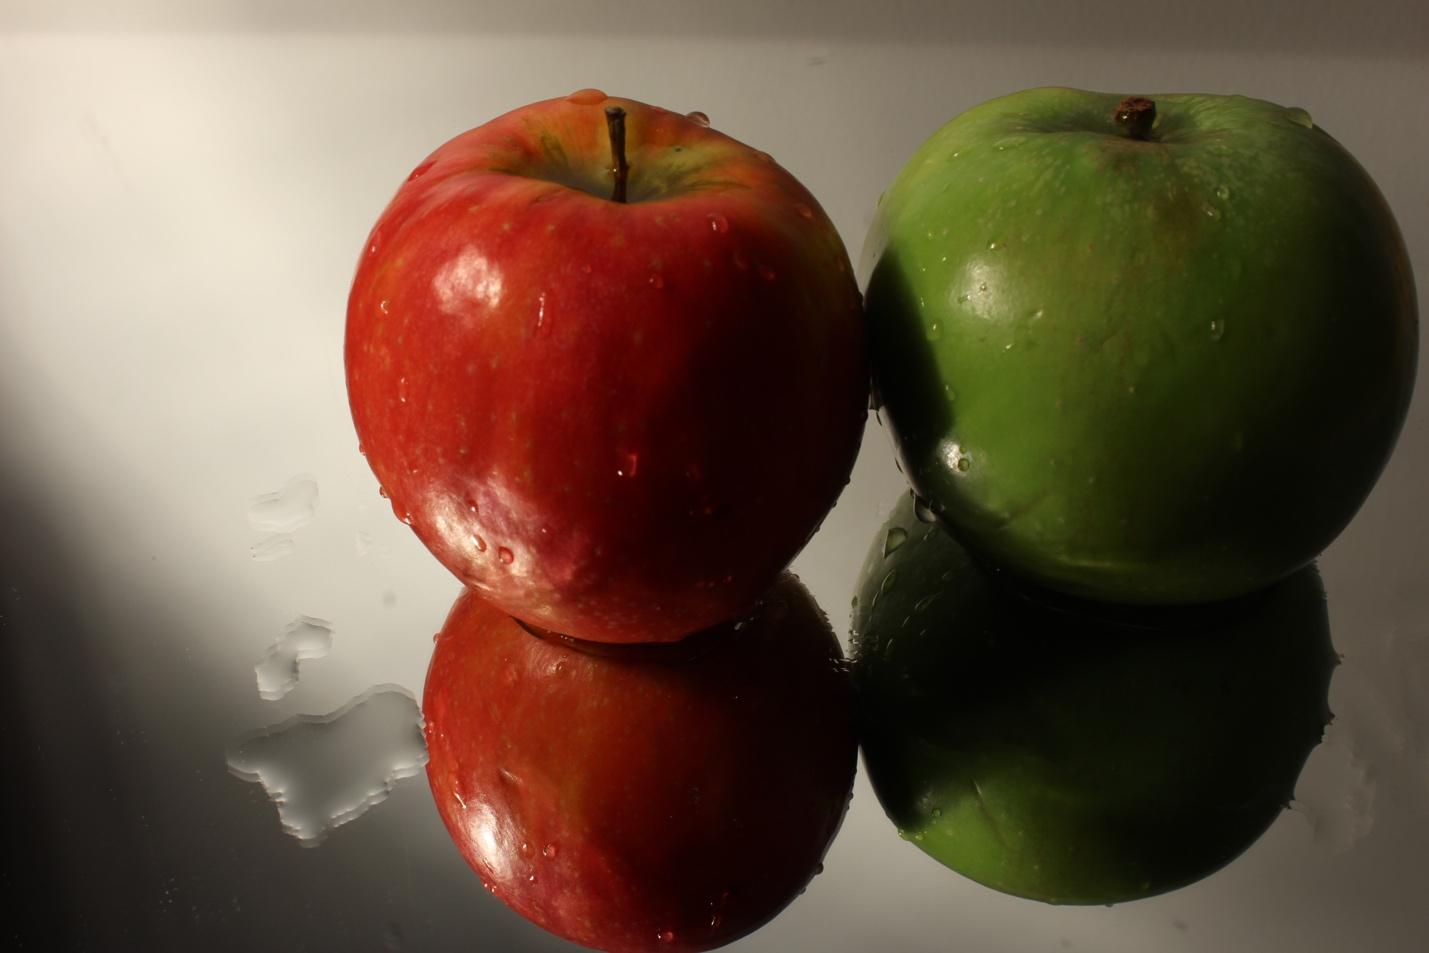 A picture containing indoor, apple, fruit

Description automatically generated